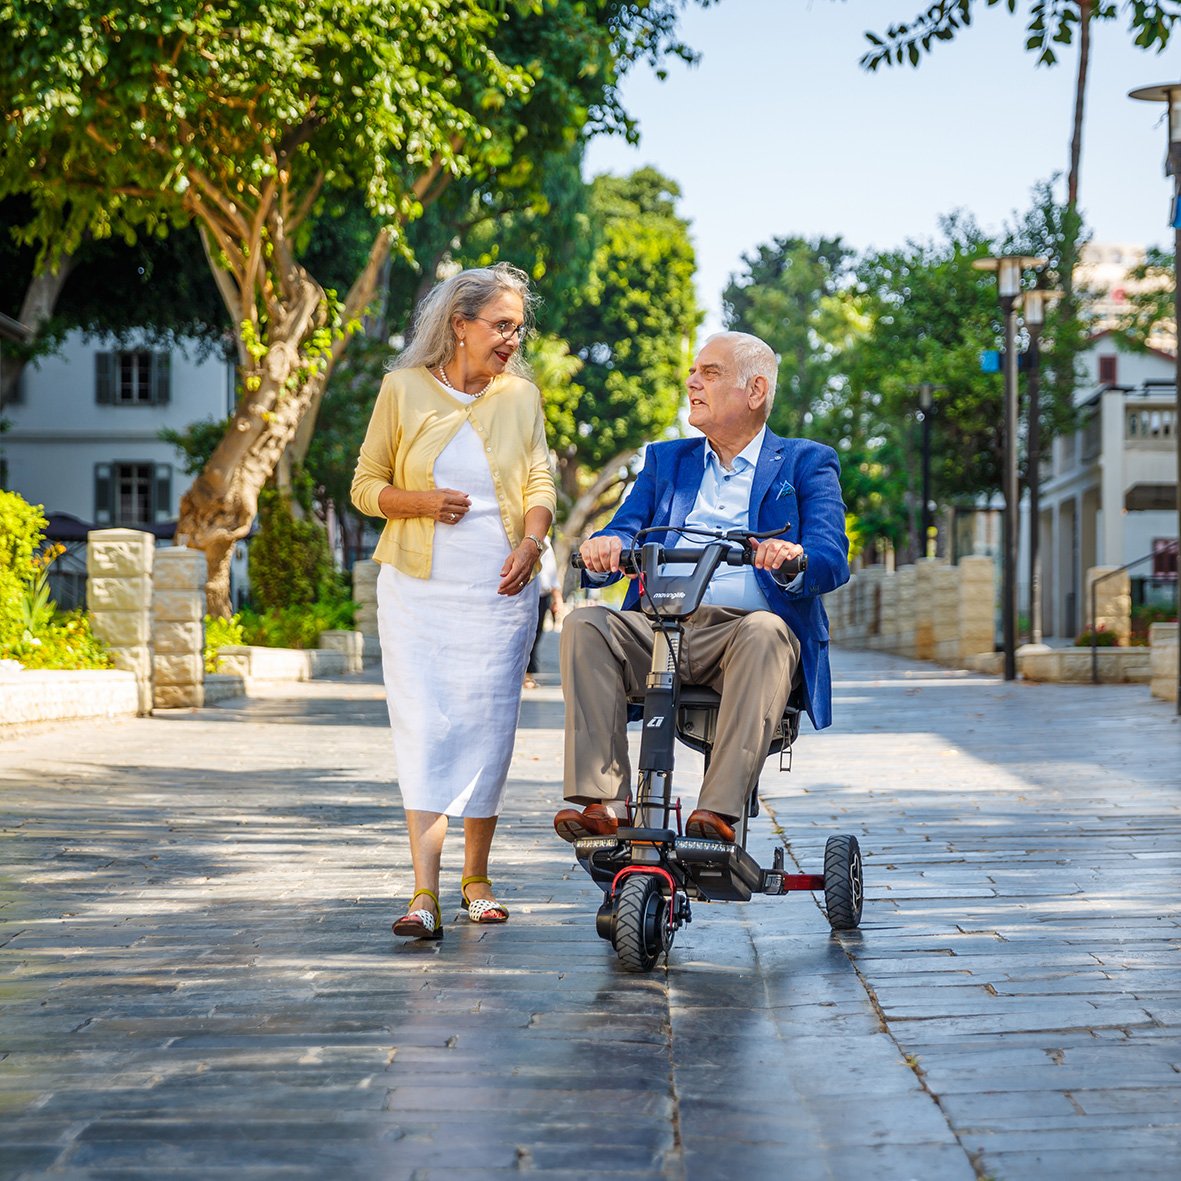 A lady walking alongside a man on an ATTO Sport mobility scooter